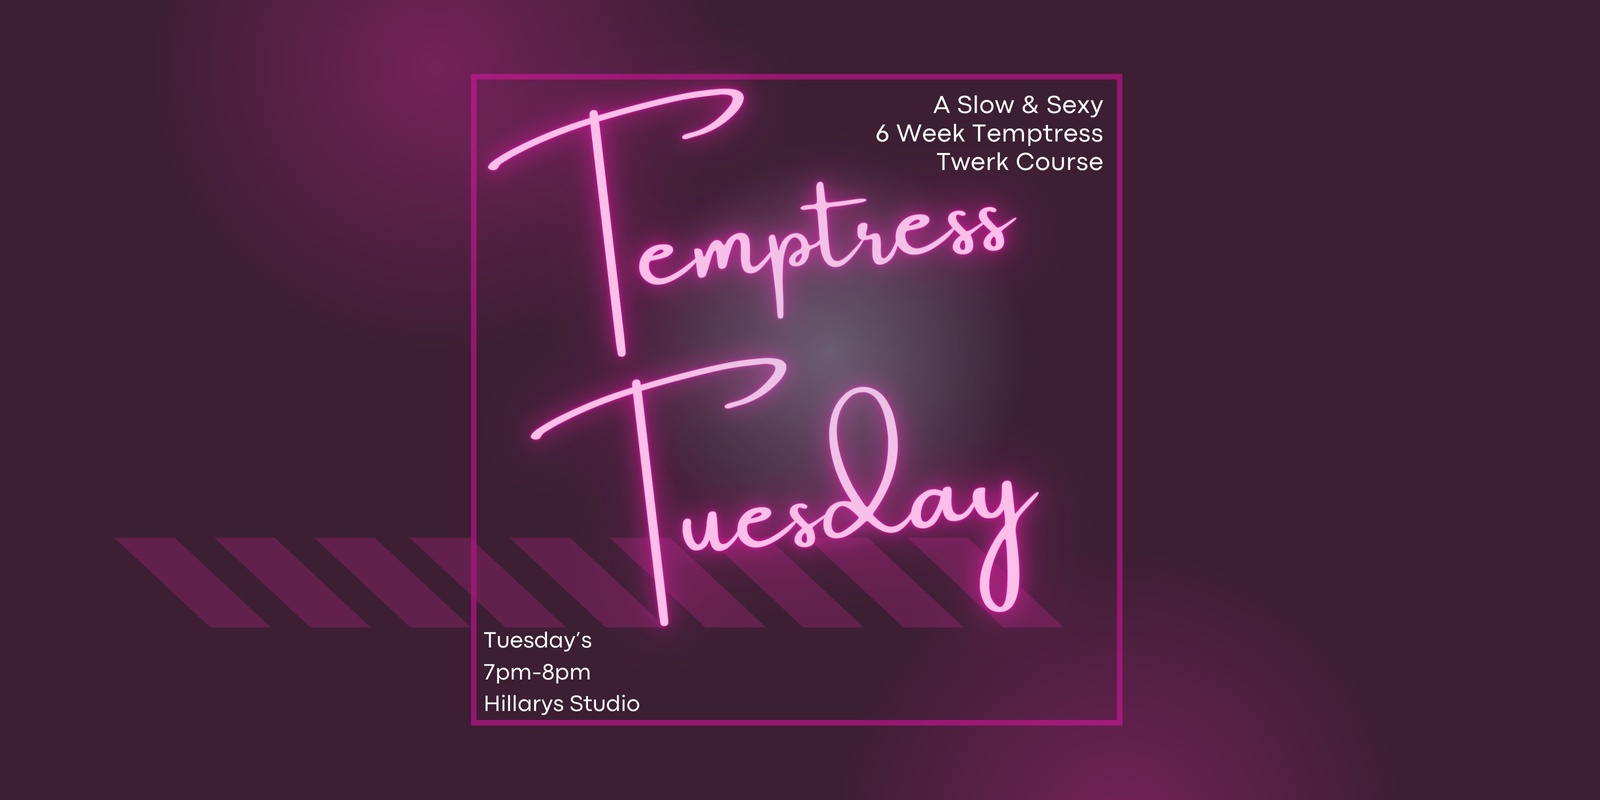 Banner image for Temptress Tuesday's 